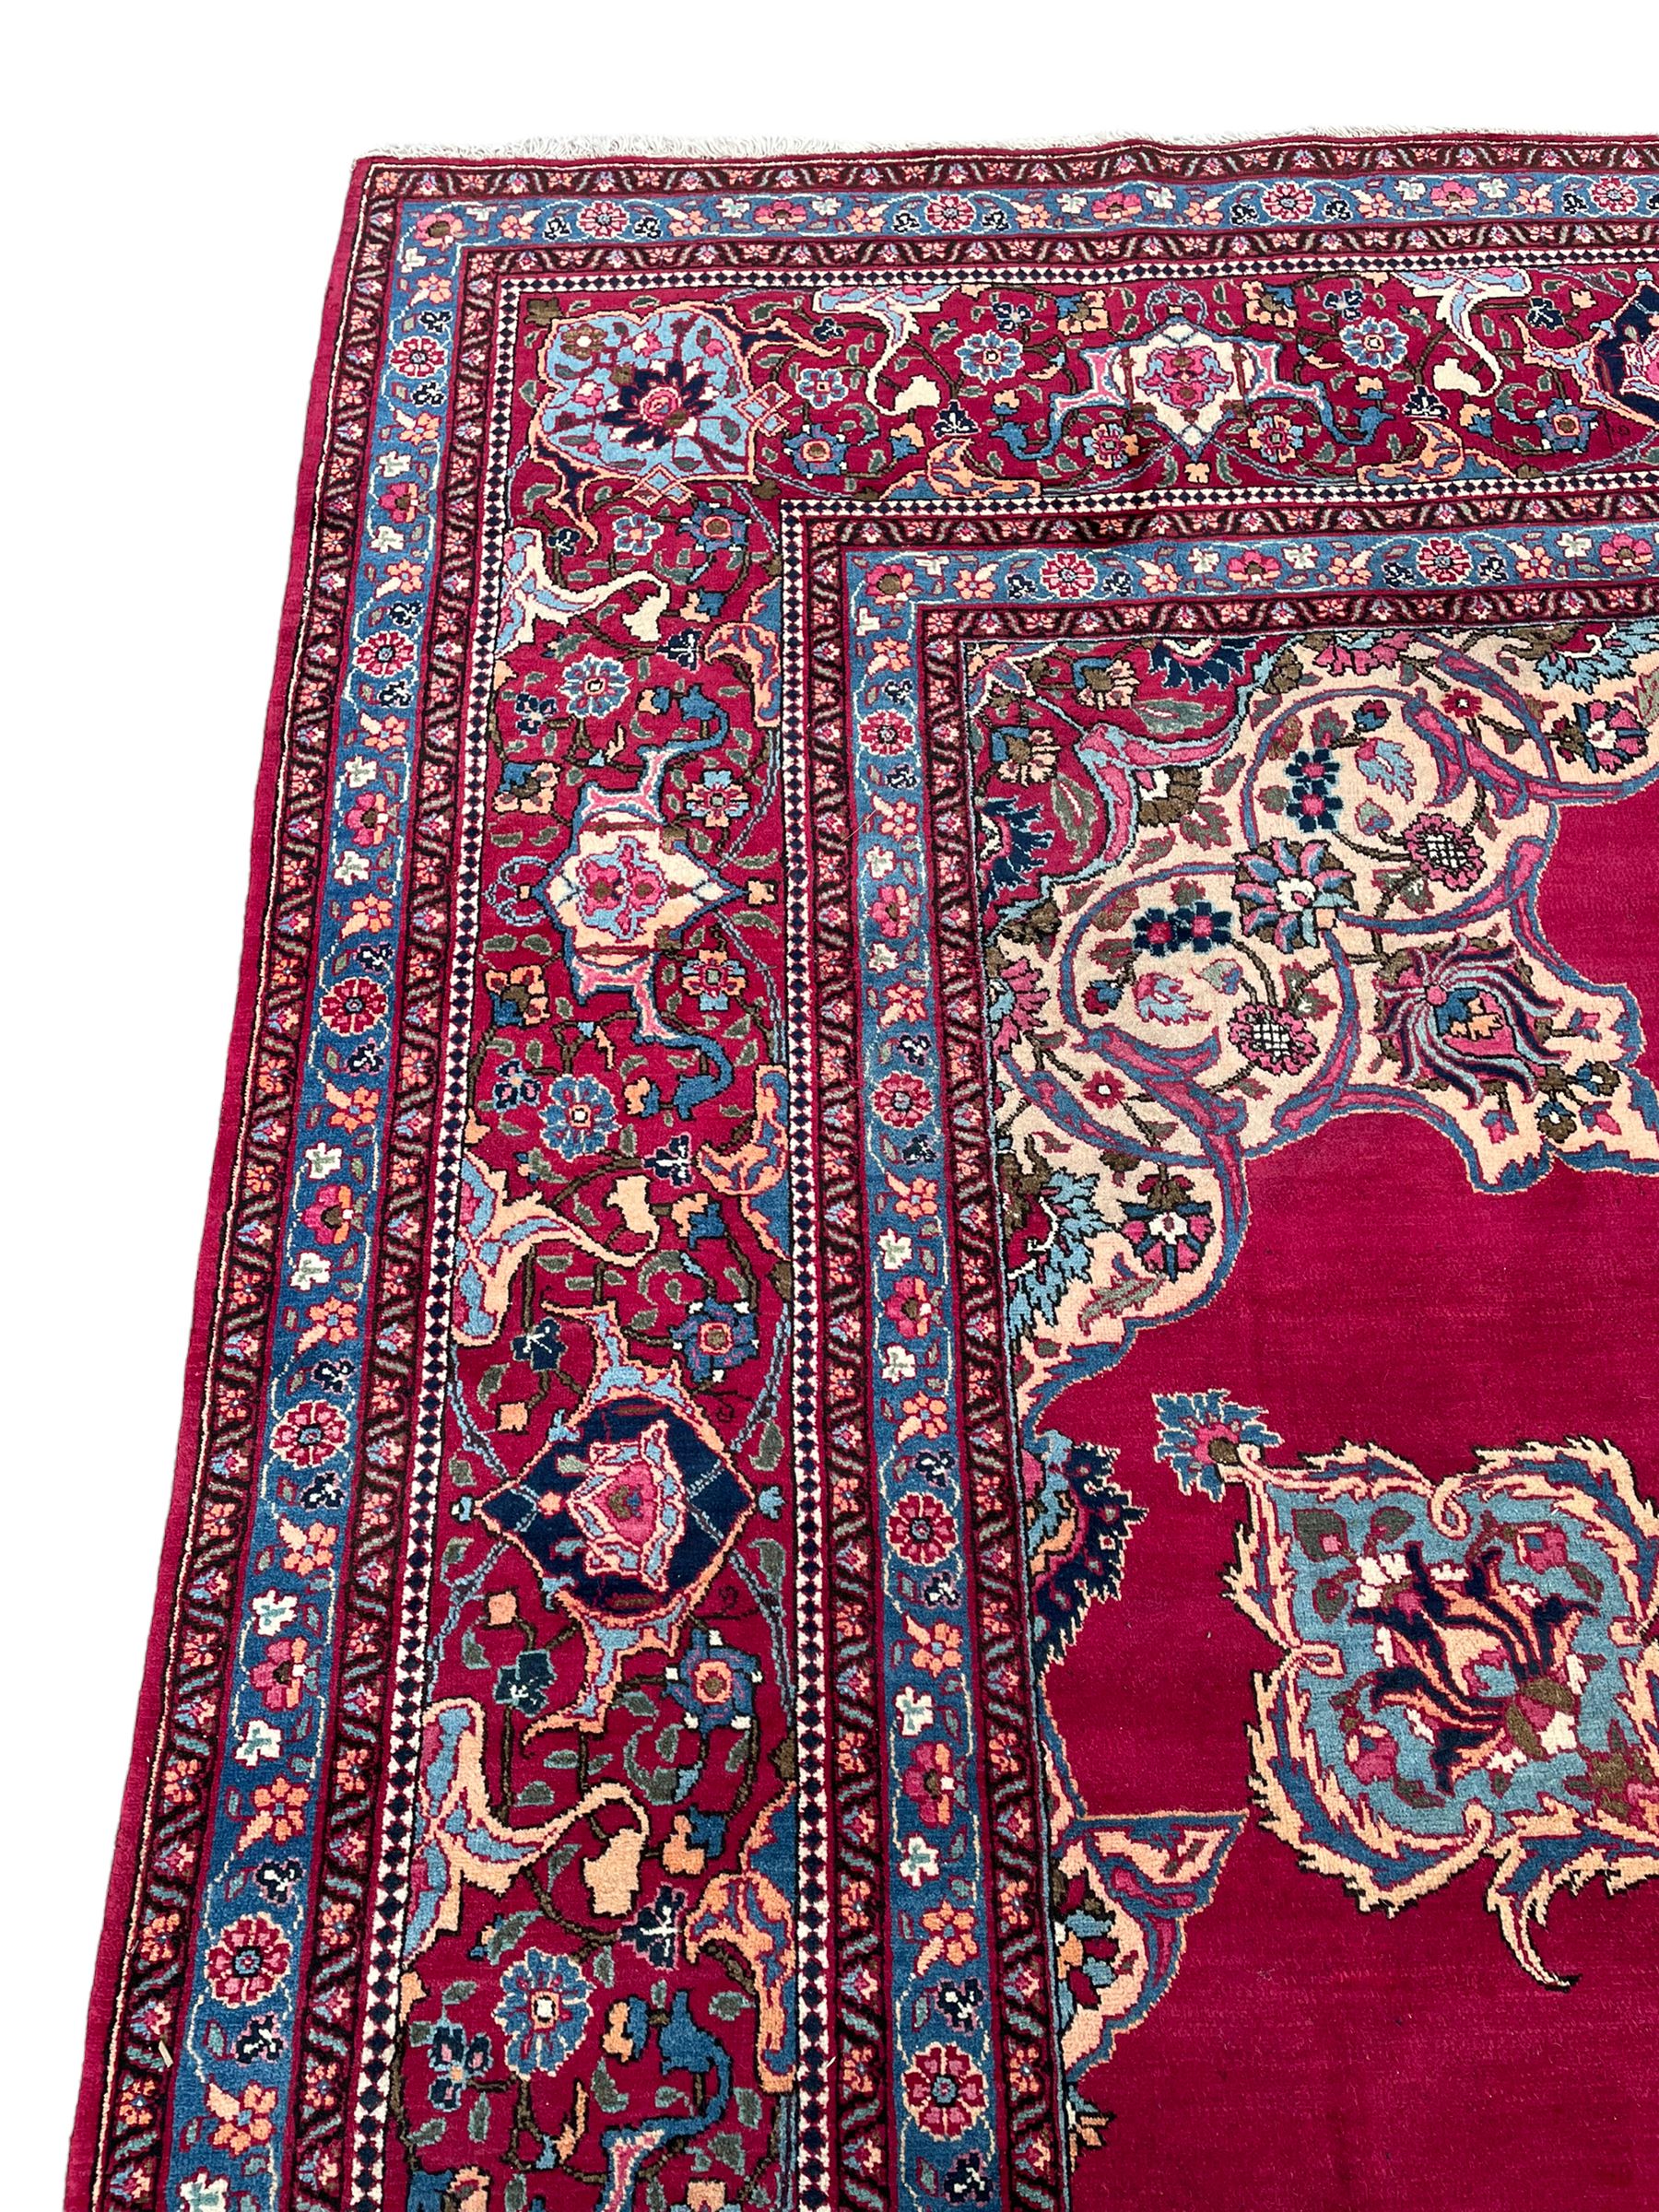 Large Persian Meshed red ground carpet - Image 4 of 6